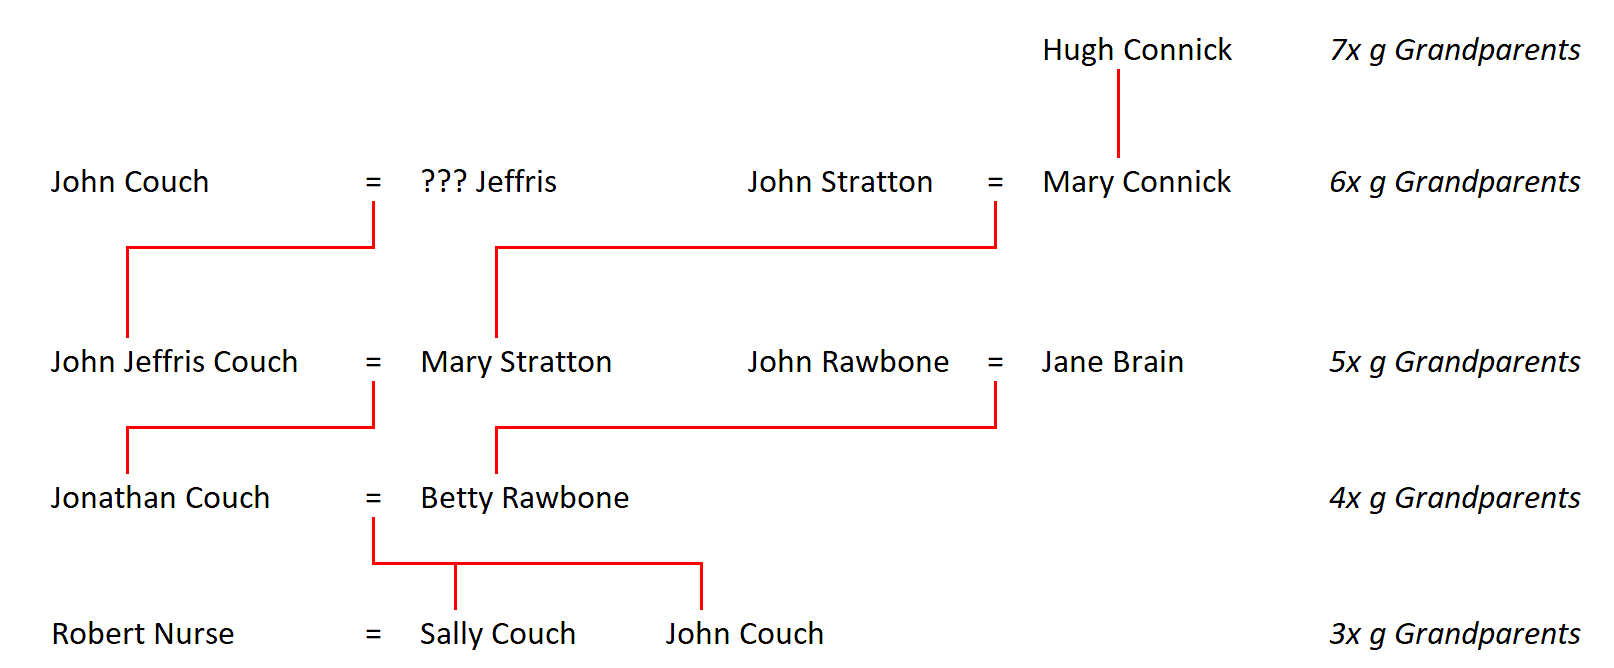 Figure 1: My Couch, Stratton and Connick Ancestors